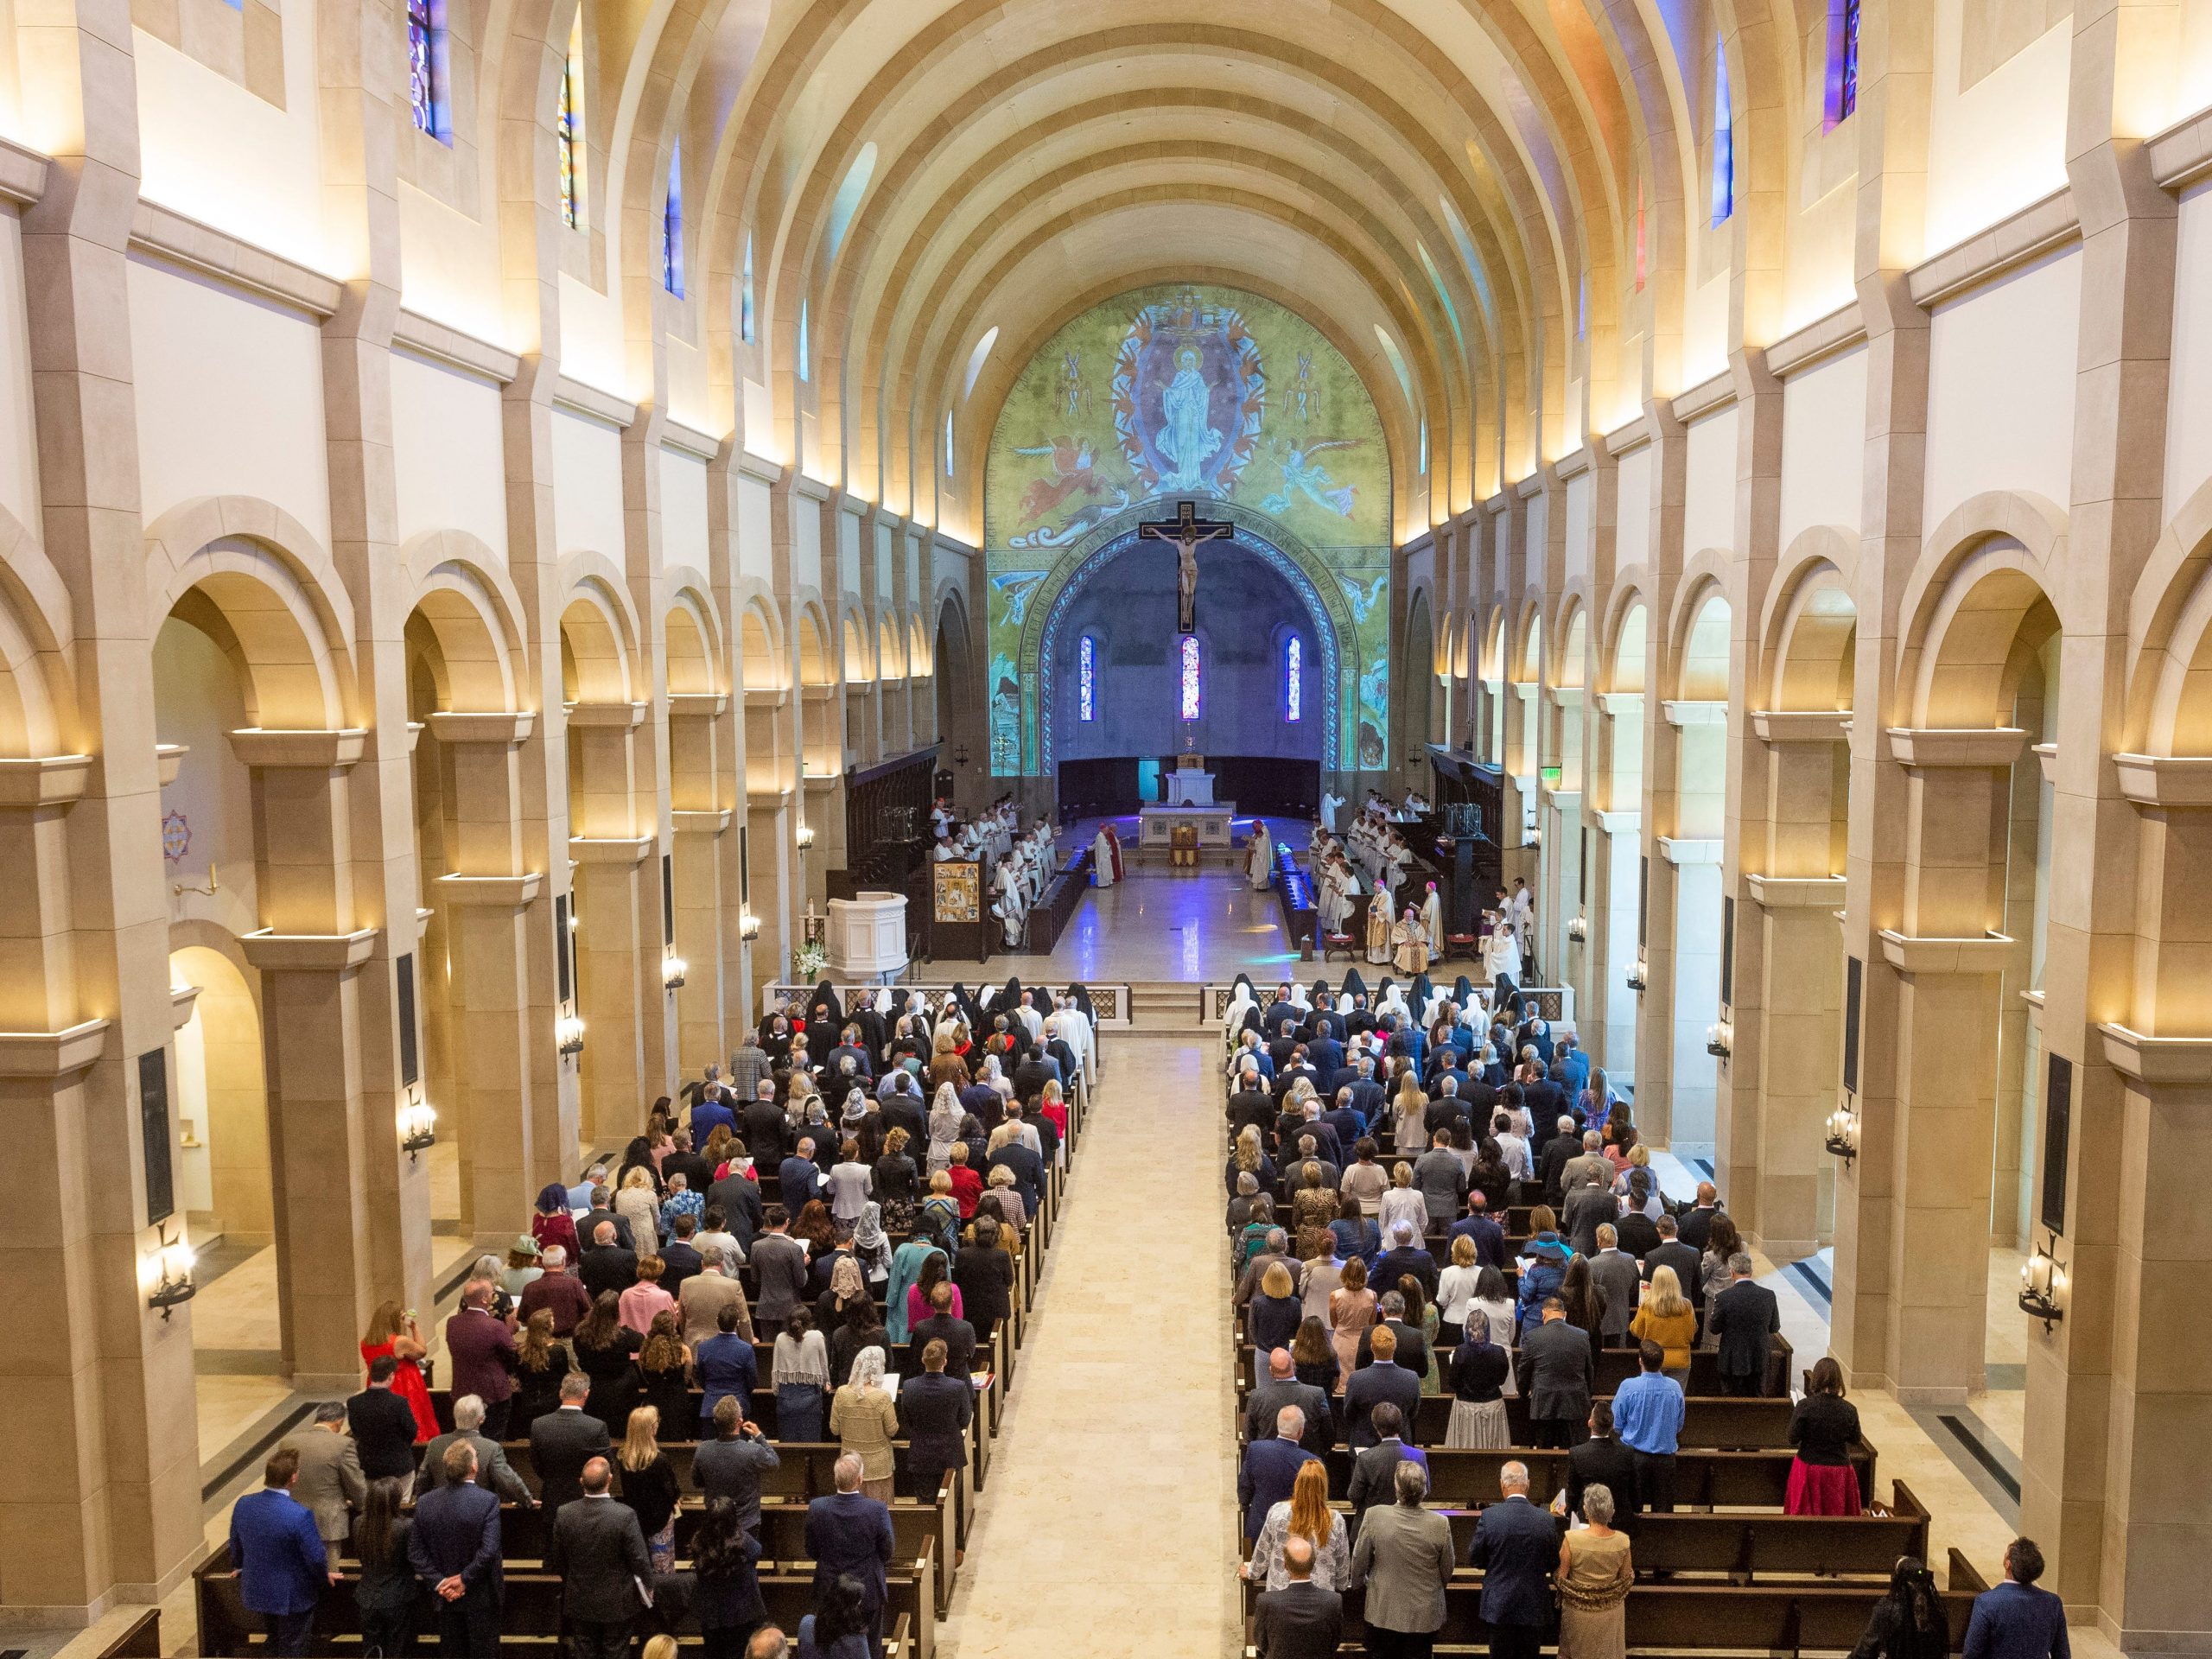 A large church with an arched ceiling and alter lit up by colored lights and pews packed with people.